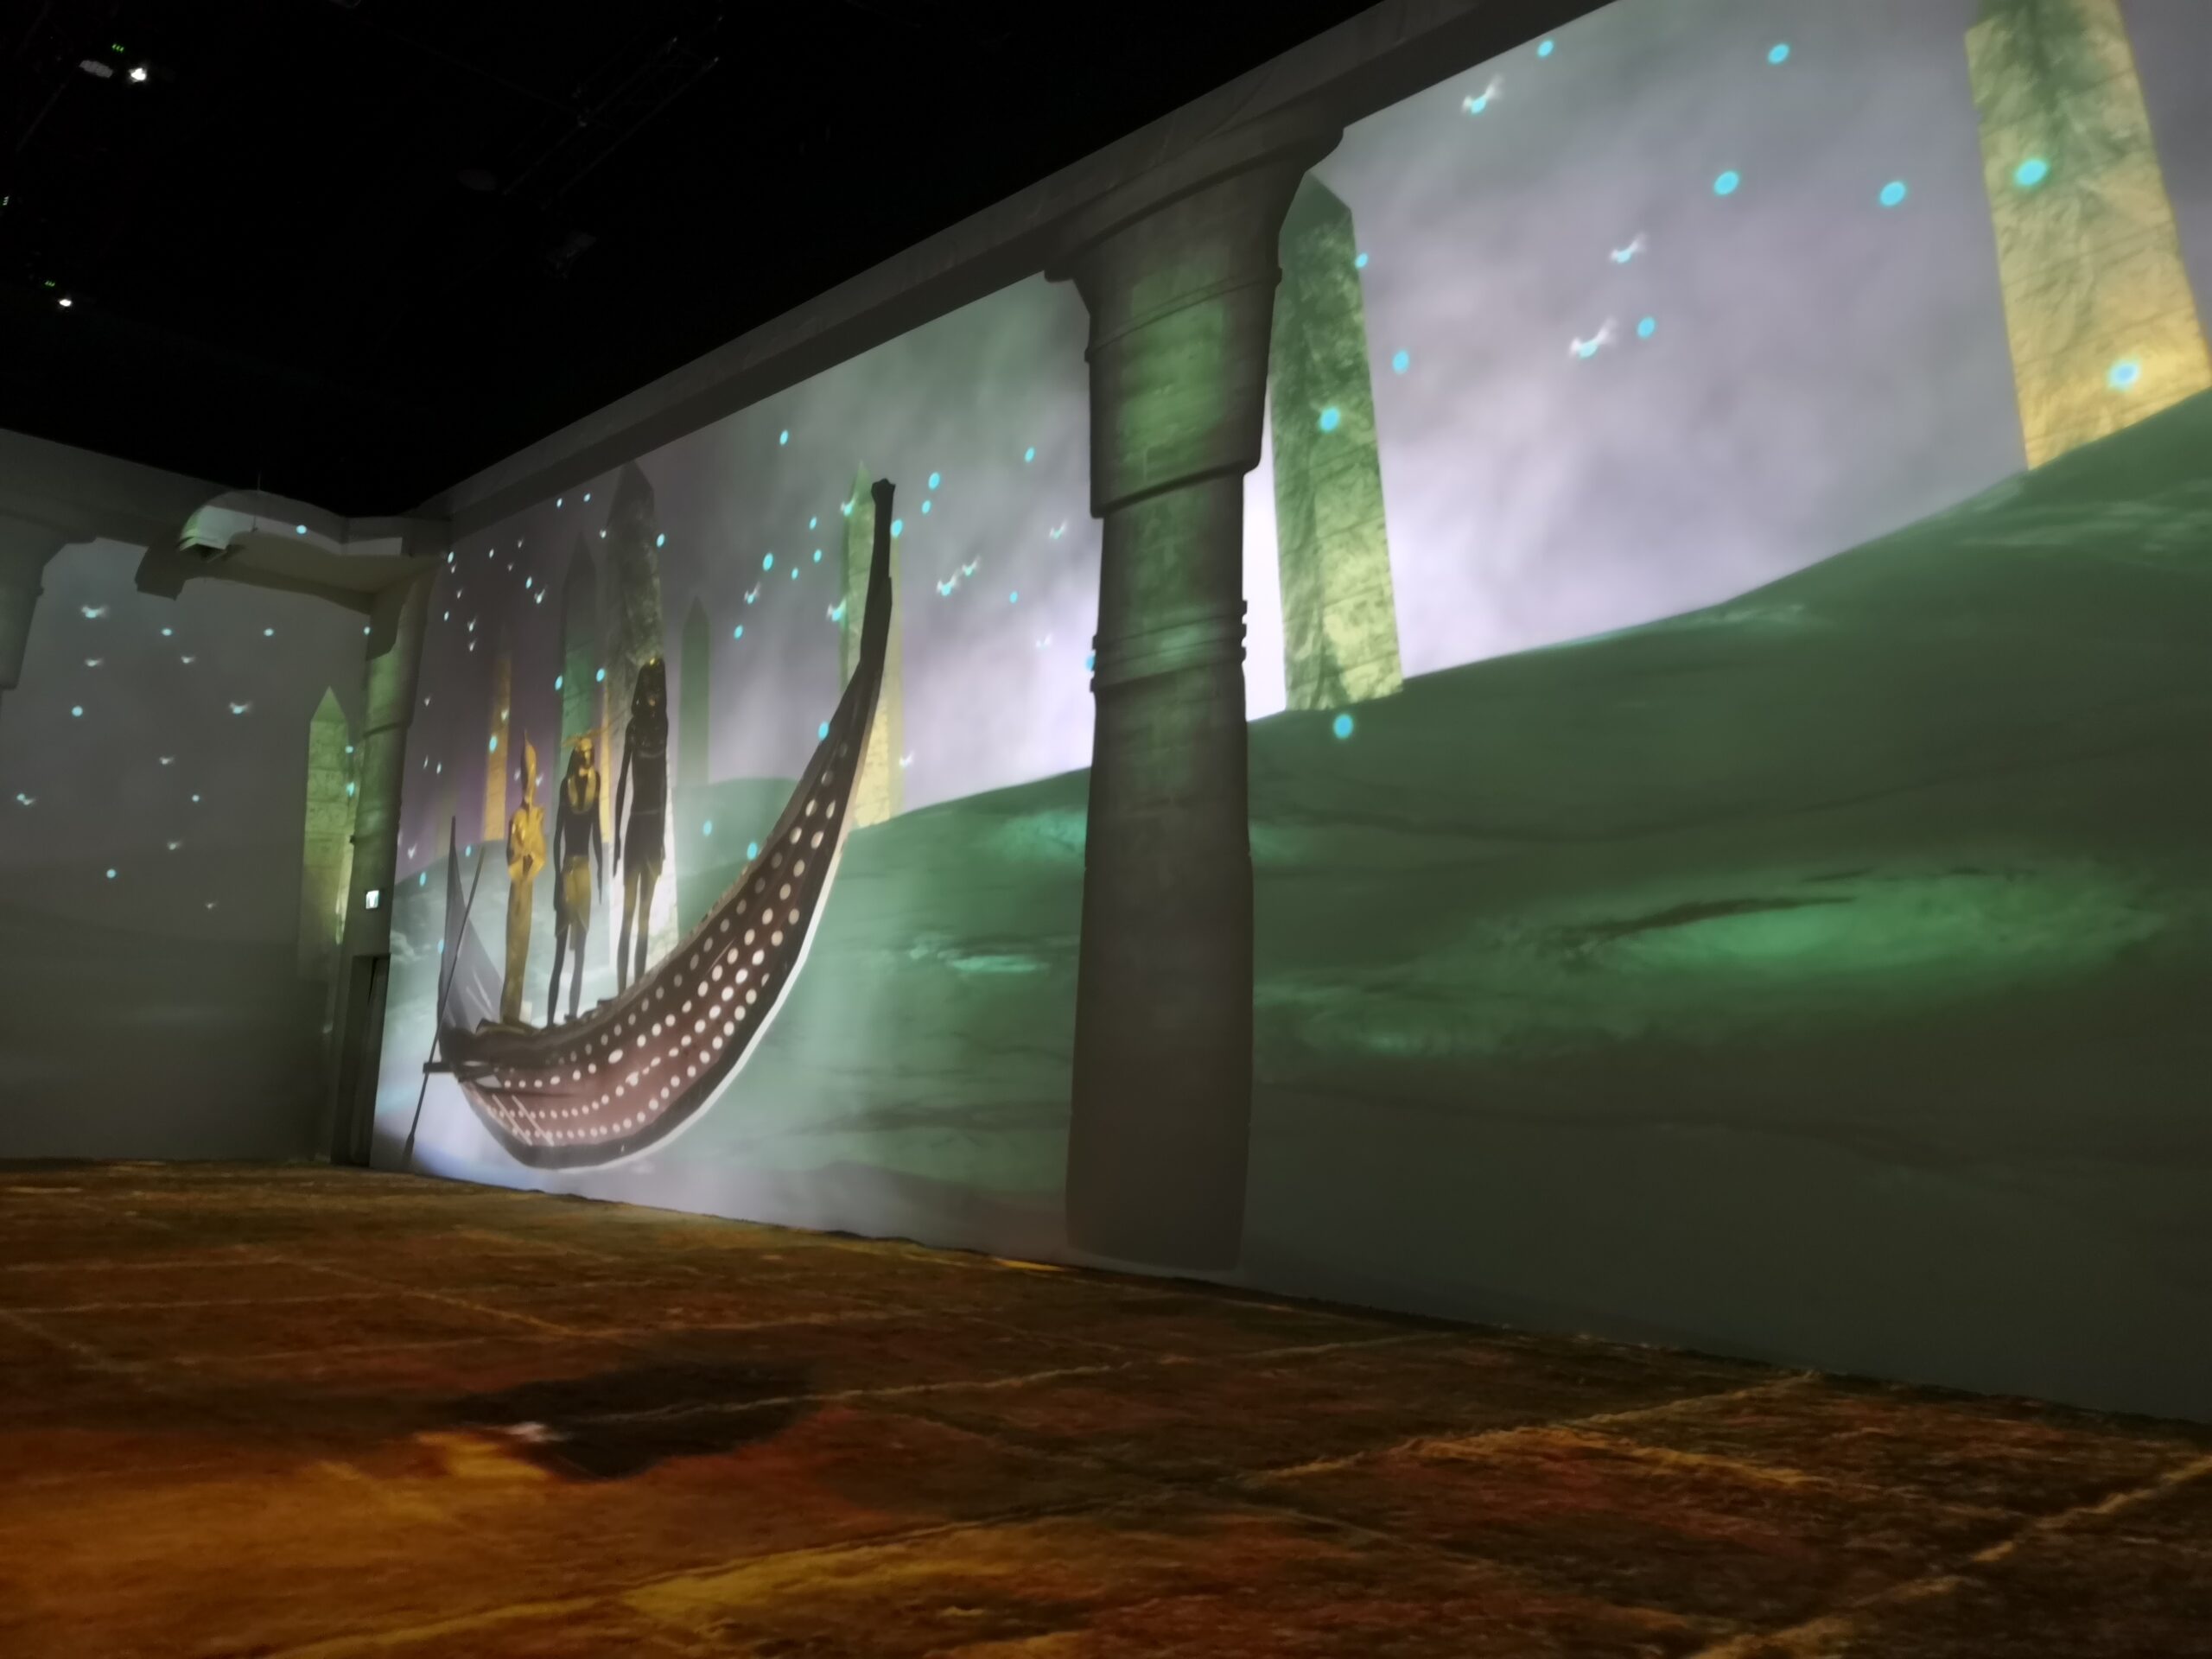 Image from Immersive Tut. The boat in which Re and Tutankhamun will be travelling in their journey to the Afterlife appears on the wall.